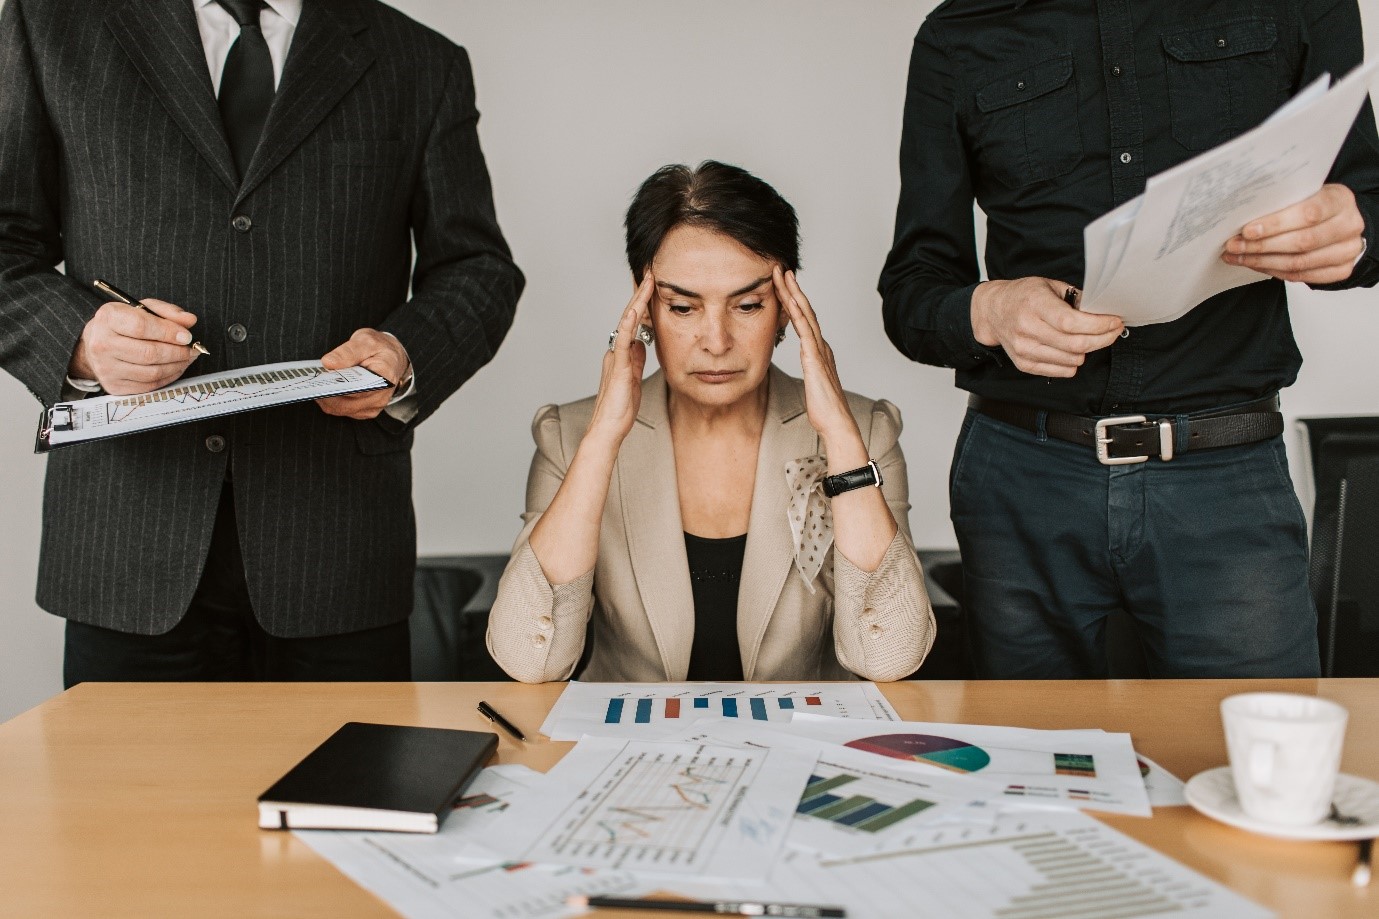 Reduce workplace stress with coaching